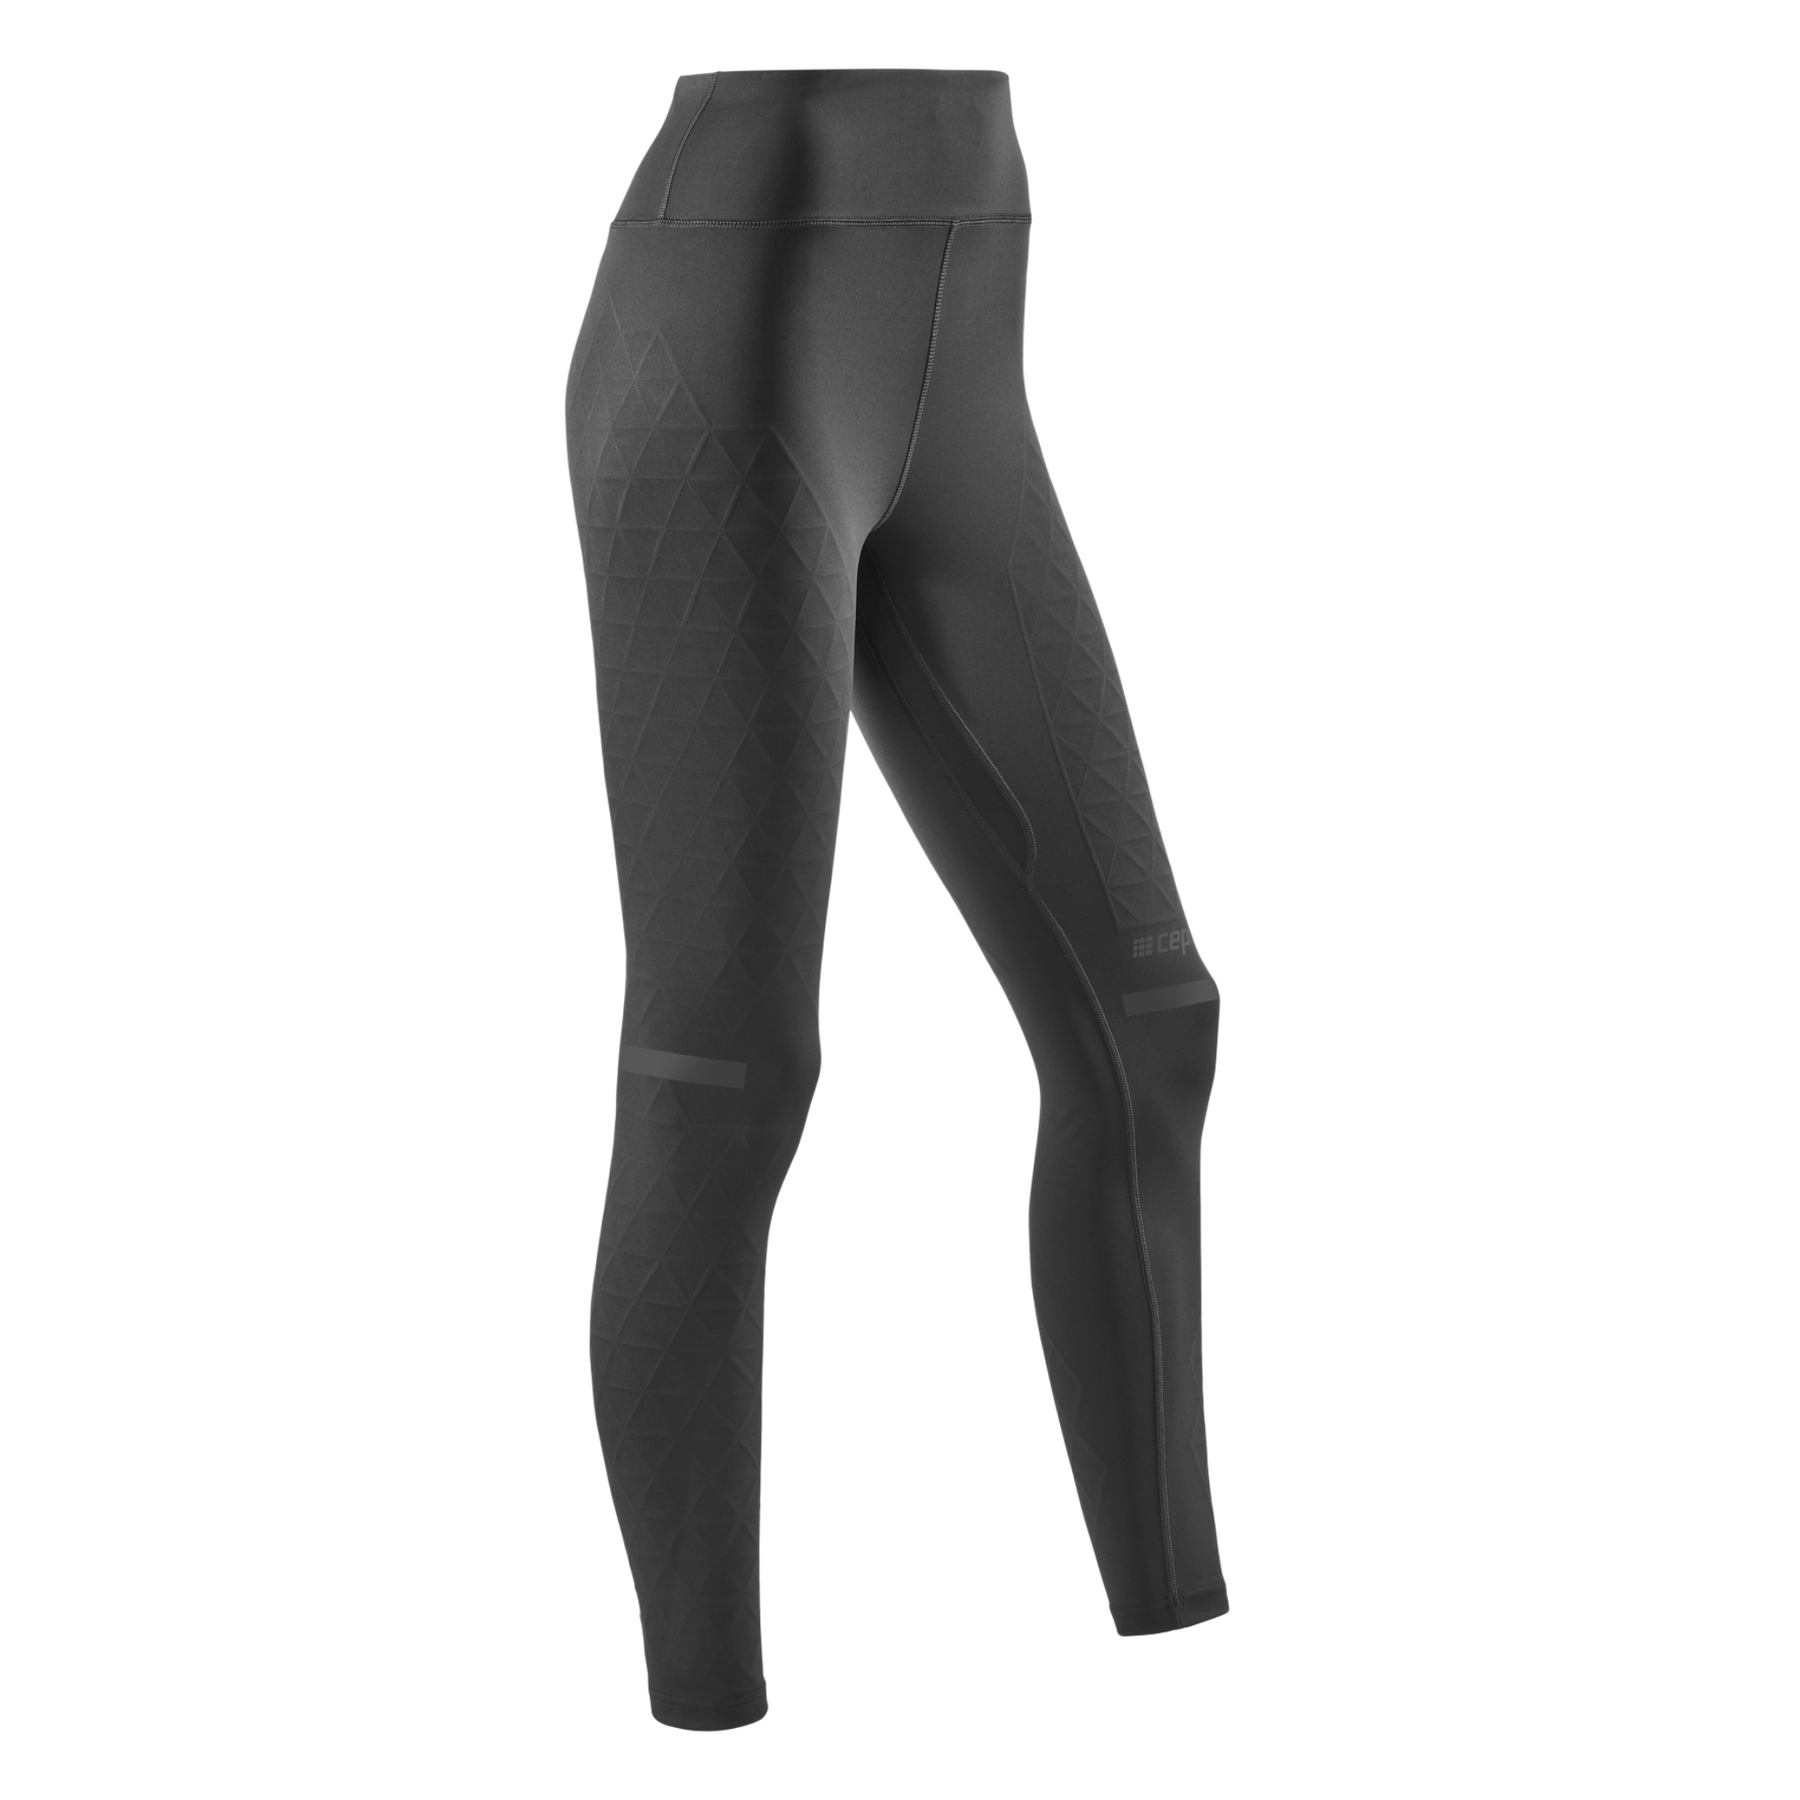 Run Support Tights for Women  CEP Activating Compression Sportswear – CEP  Compression